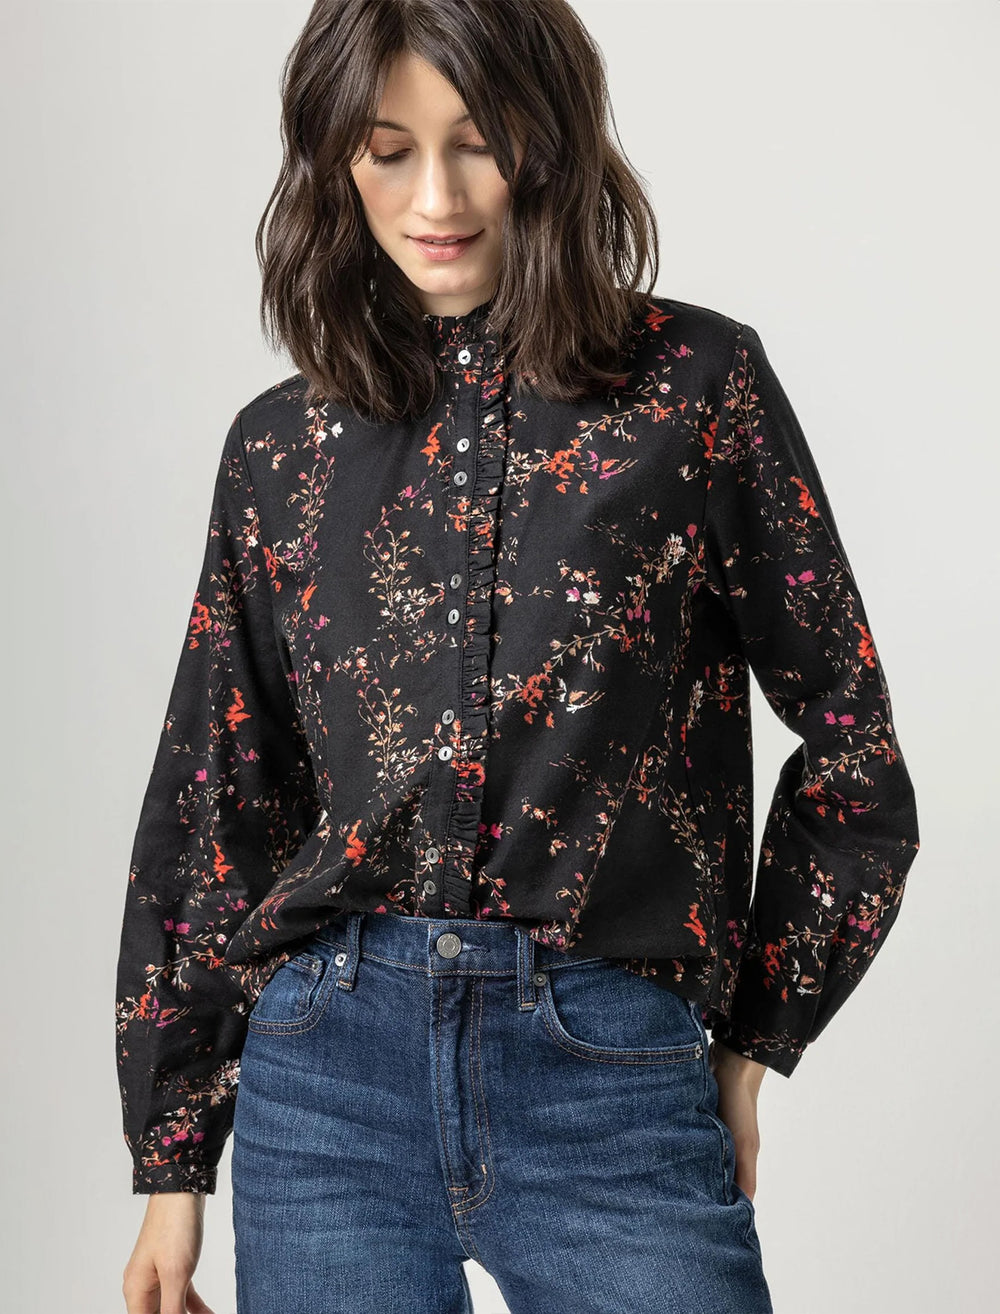 Model wearing Lilla P.'s ruffle button down blouse in black floral print.